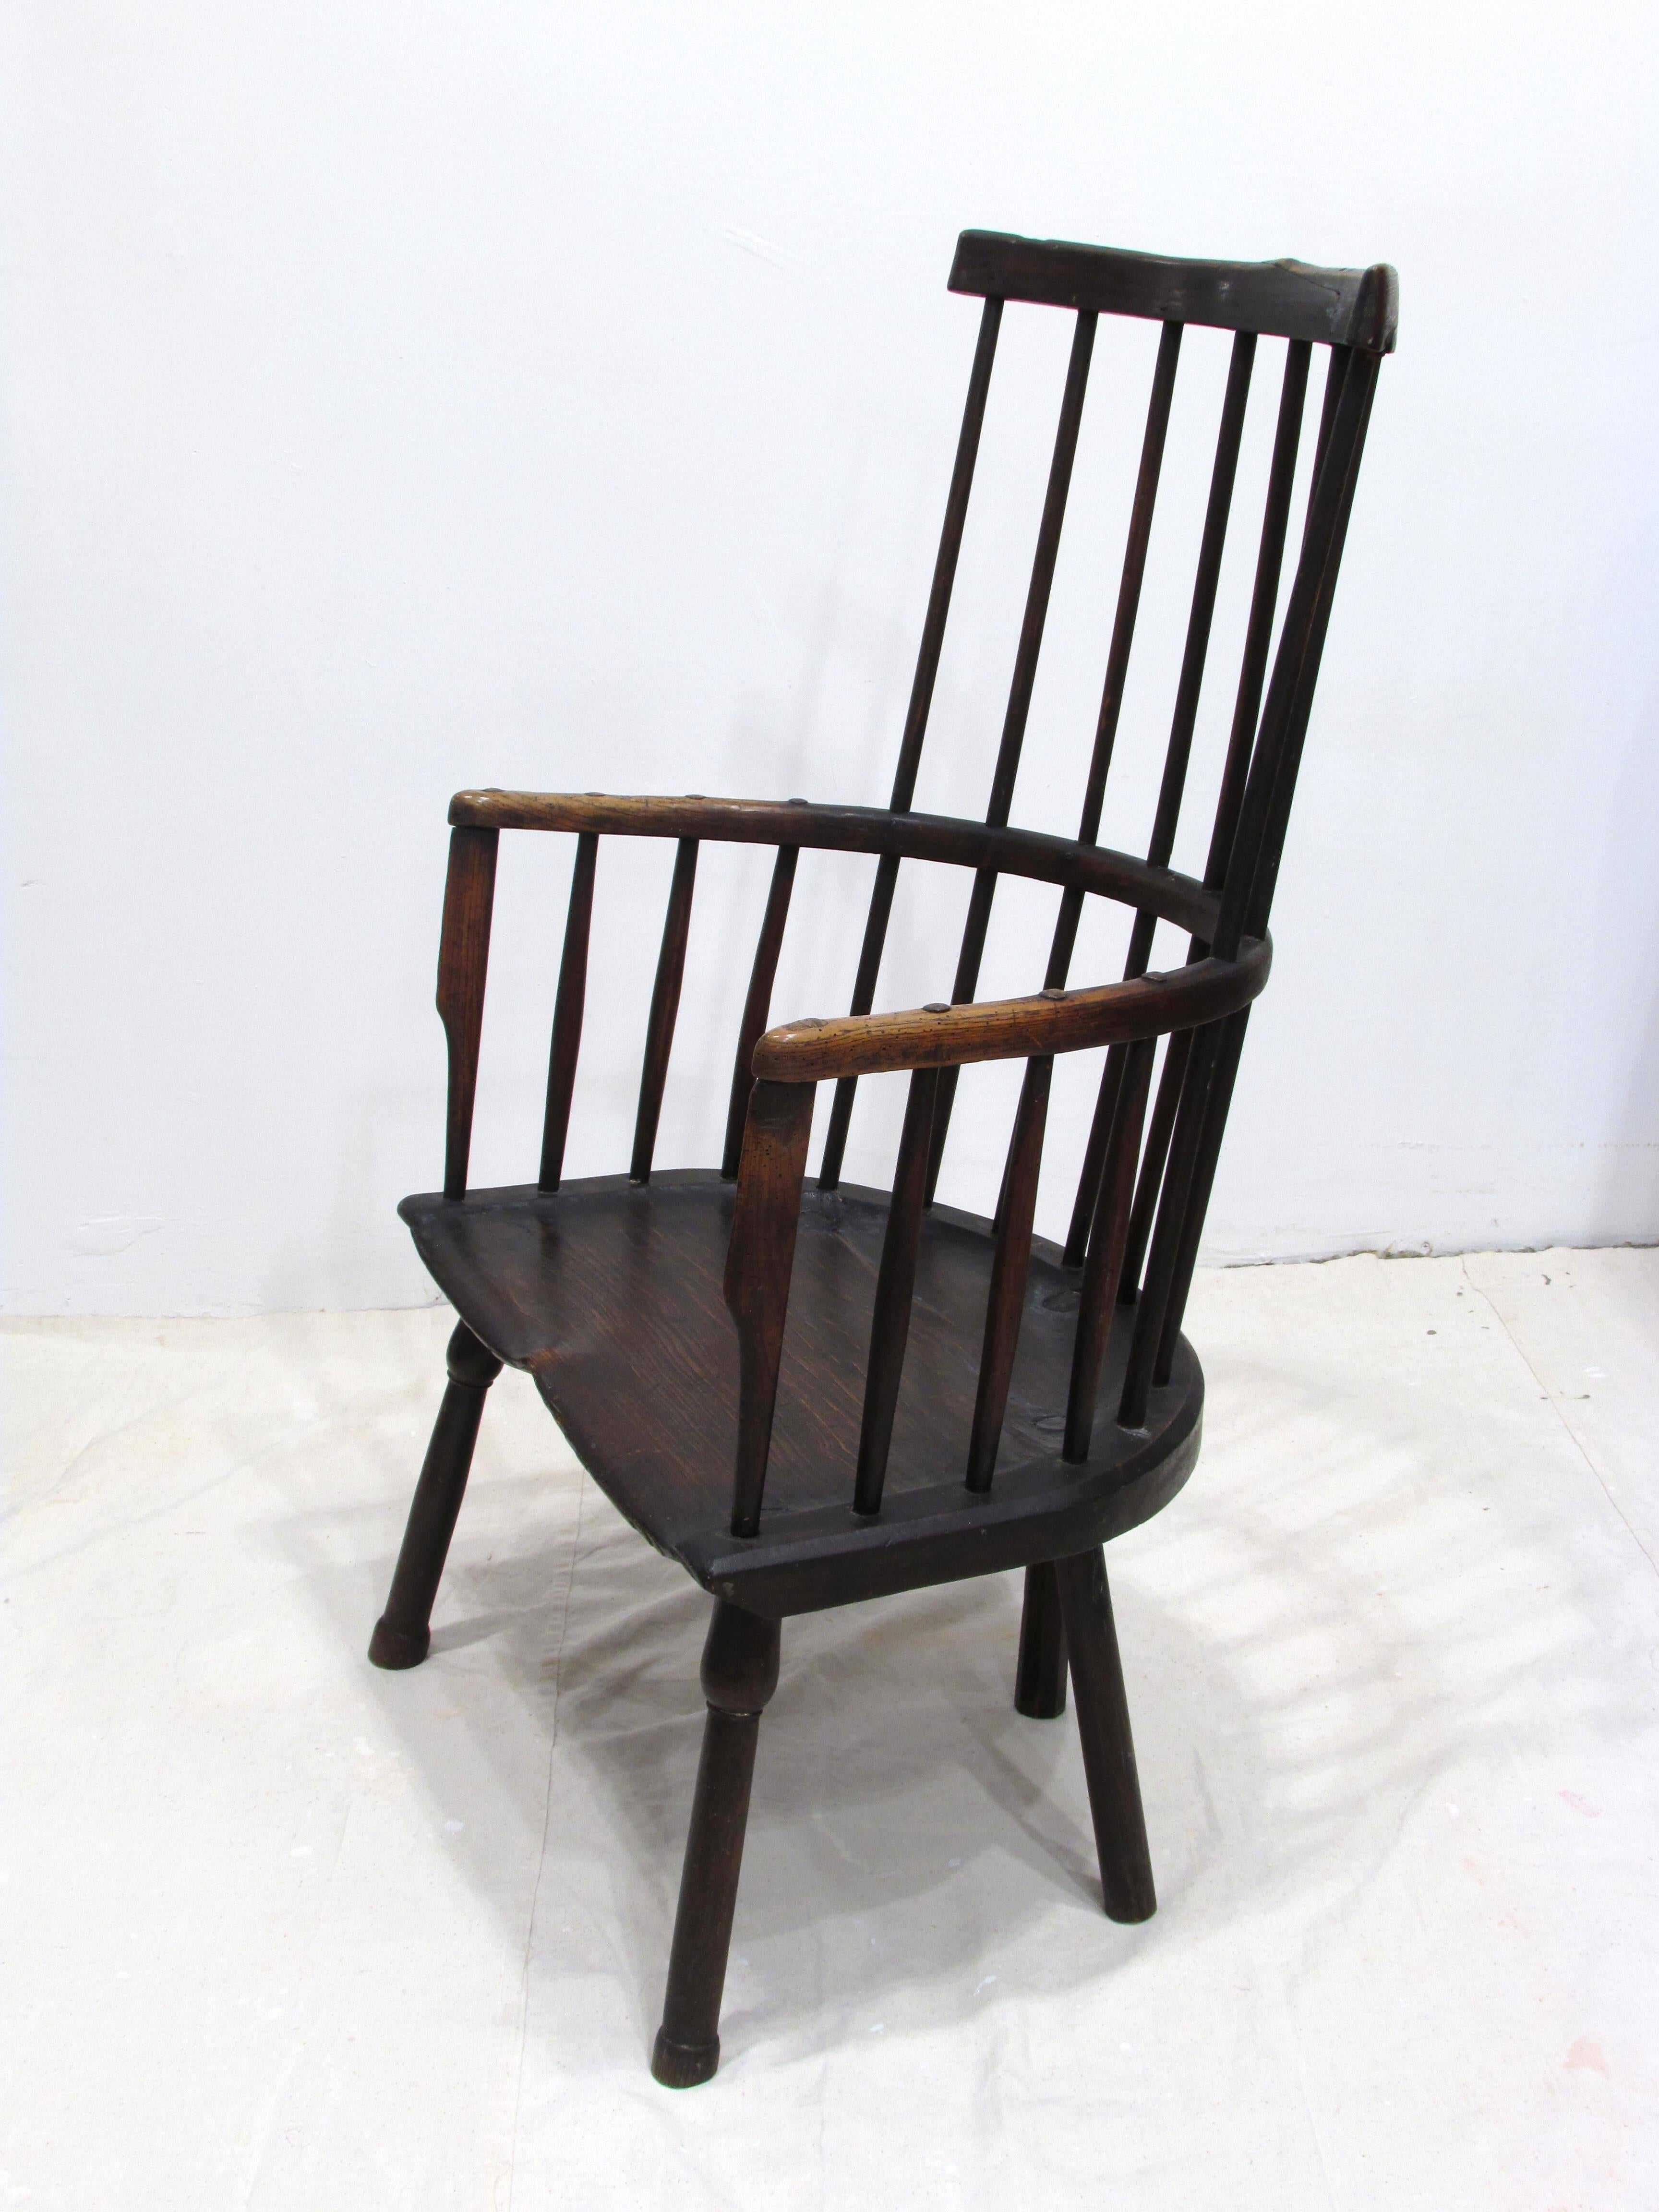 Beautiful worn and patinaed wooden comb back Windsor style armchair with five legs